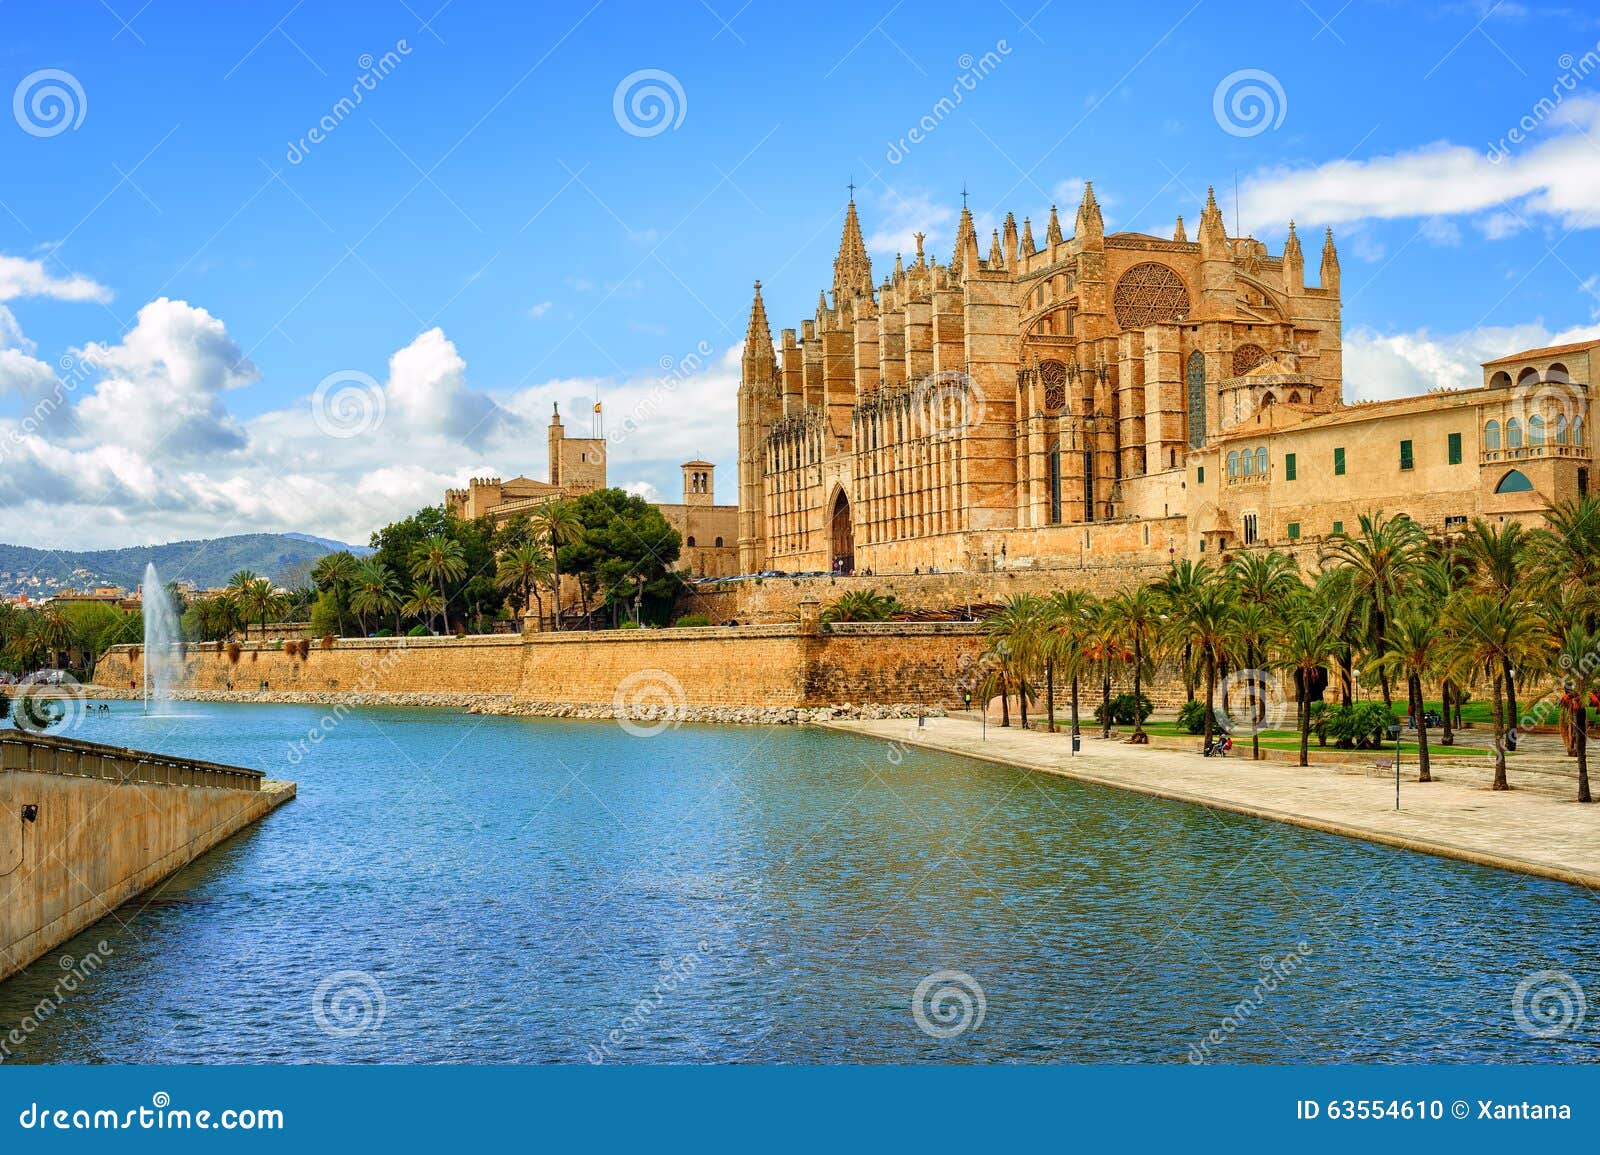 gothic medieval cathedral of palma de mallorca, spain